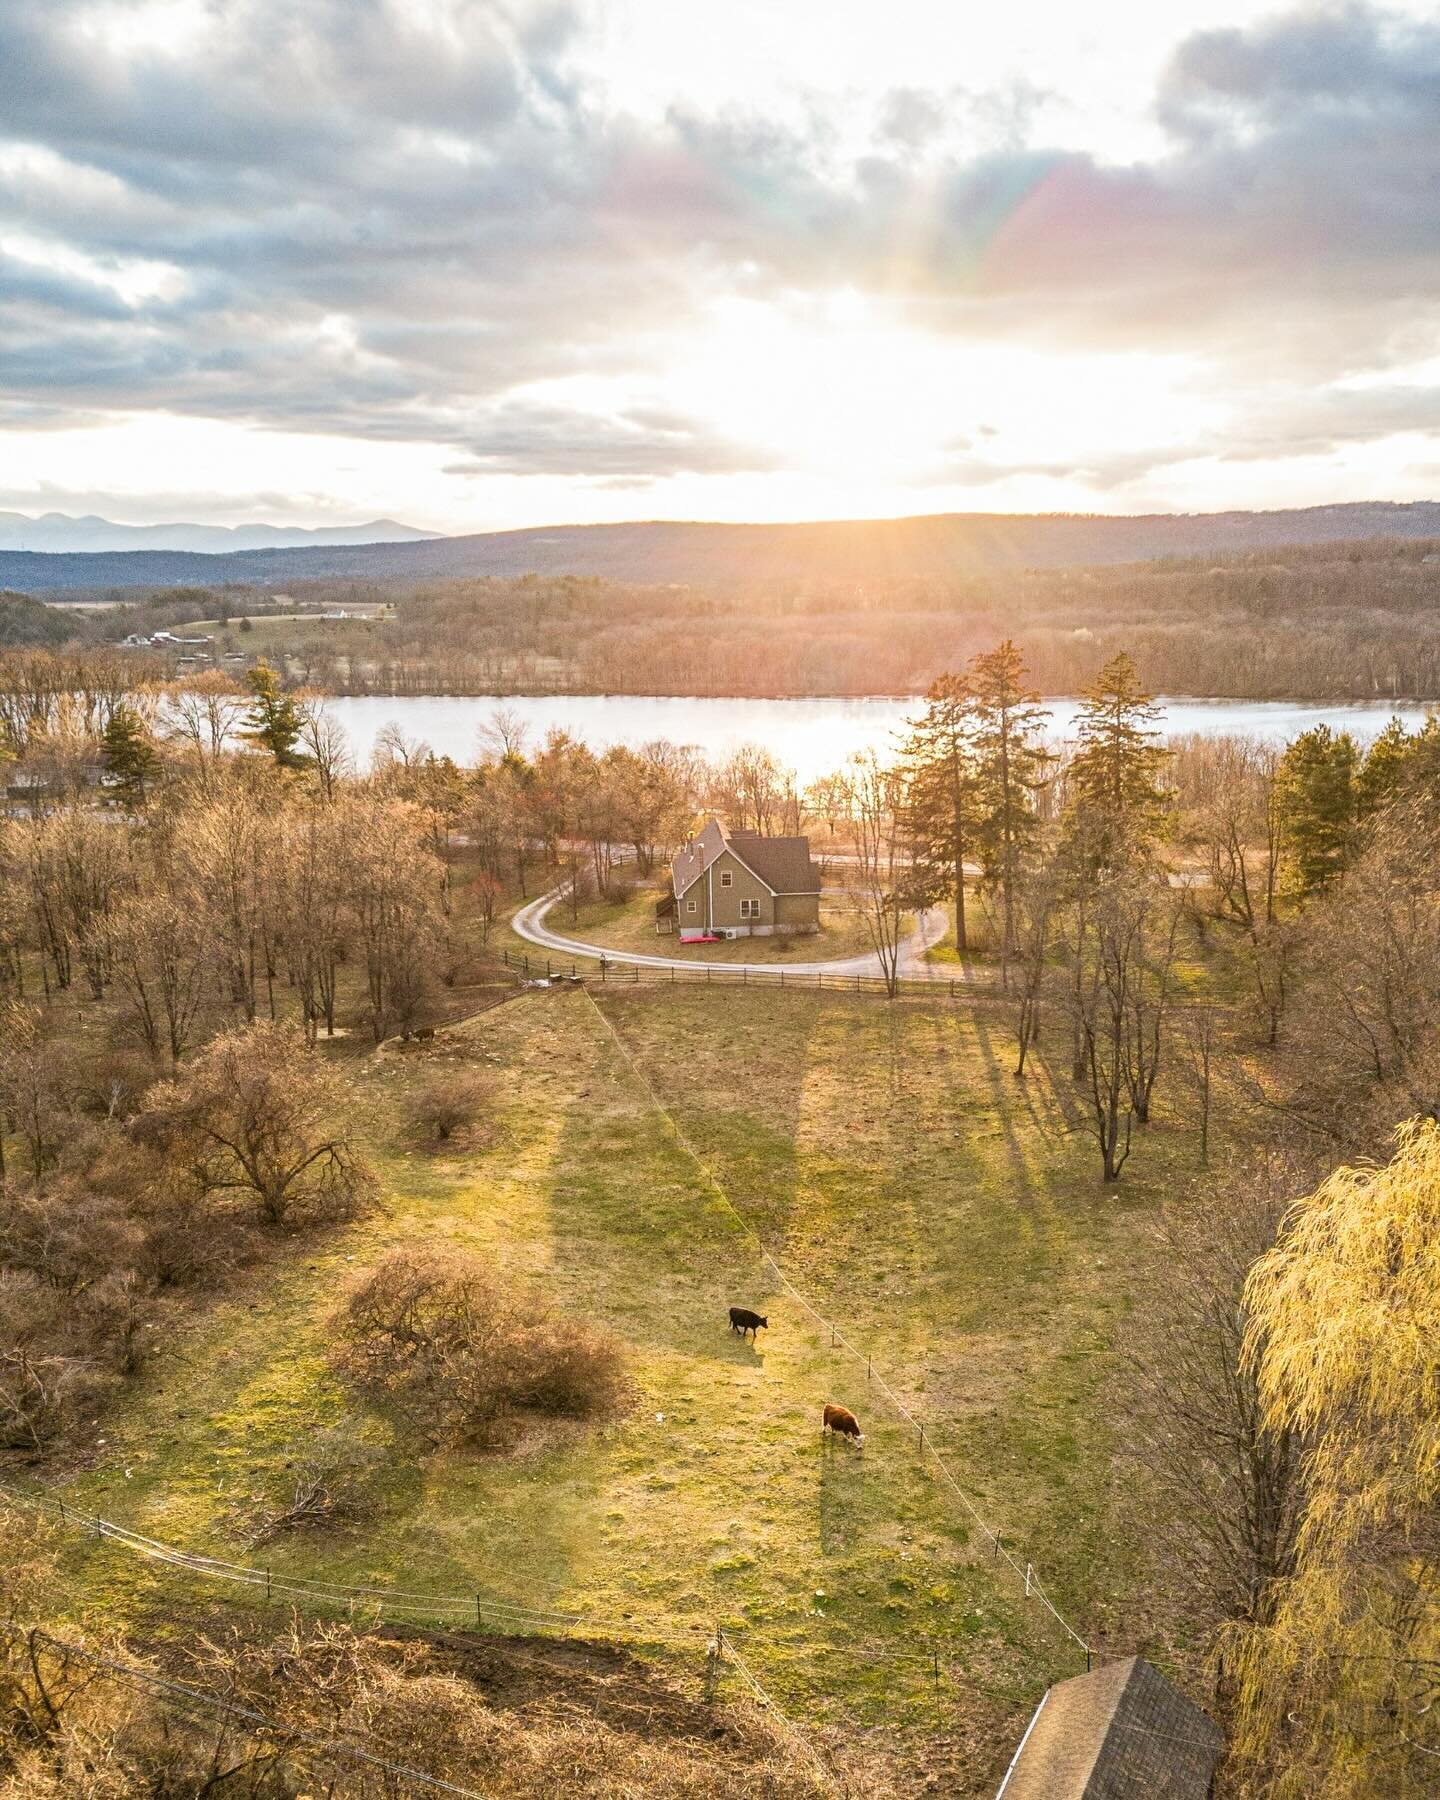 Welcome to The Stuyvesant River House

An Exclusive New Listing by @ThisOldHudson 

Nestled in upstate New York, Stuyvesant River House seamlessly blends a historical location with a warm and thoughtfully constructed Cape-style home. Offering breatht